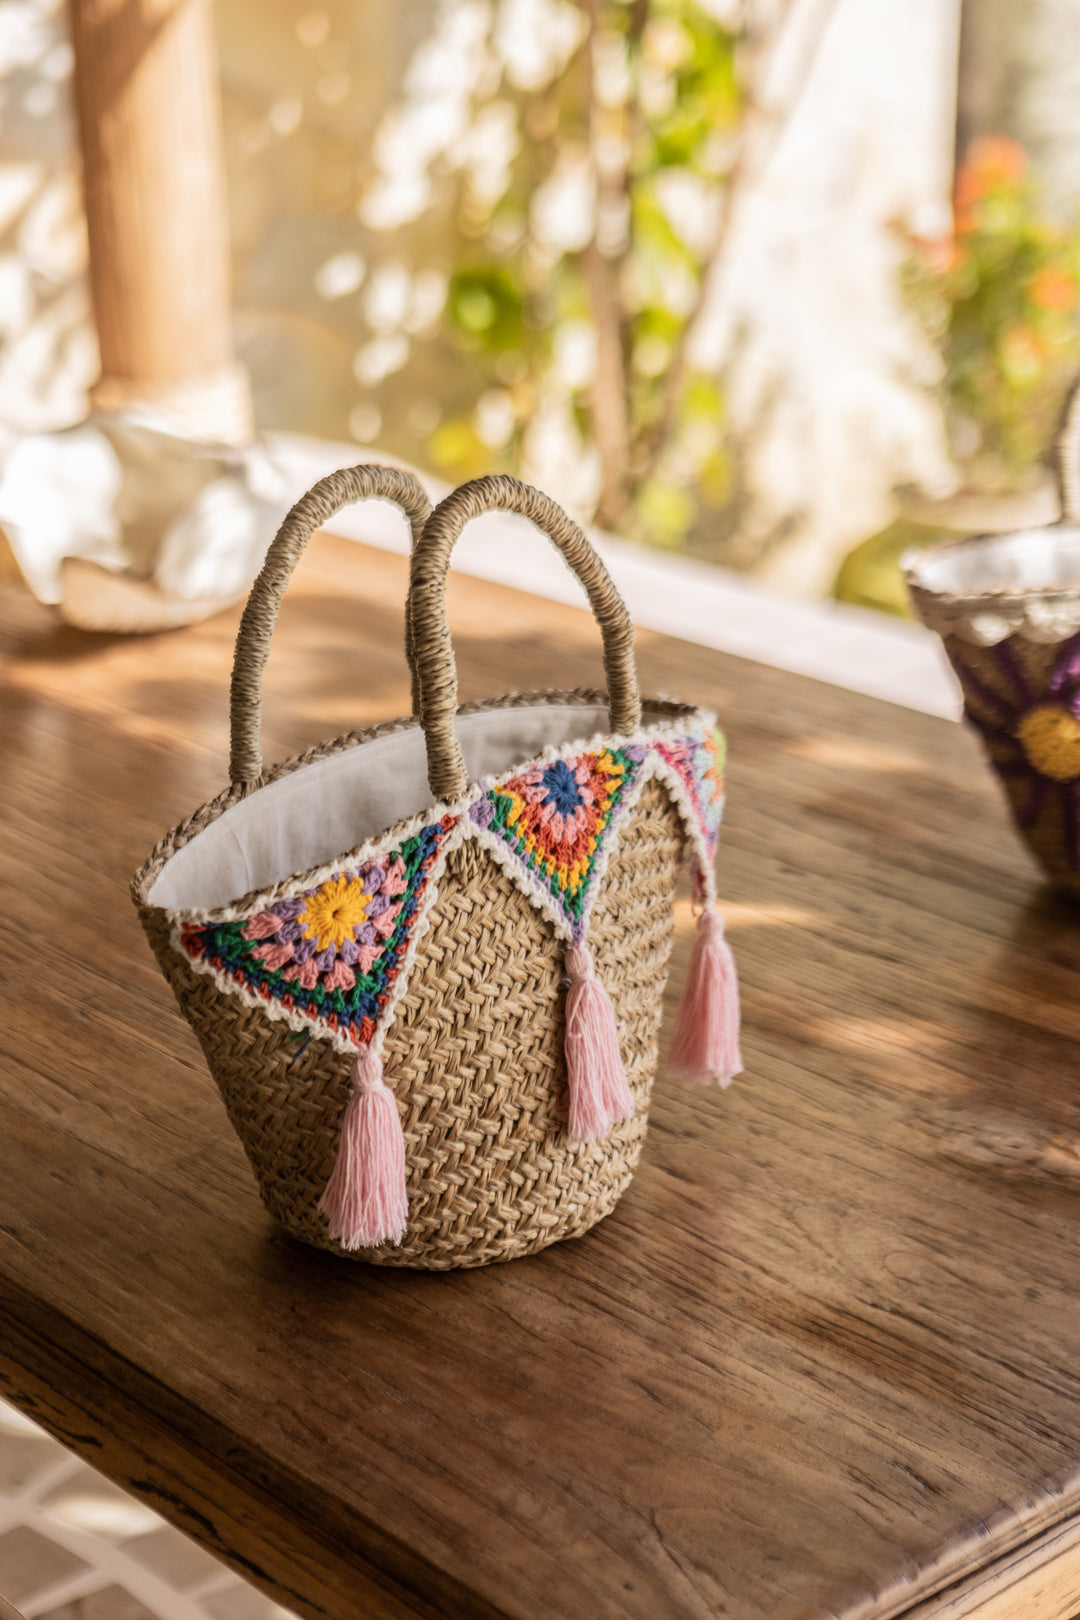 Small colorful wicker bag with fringe